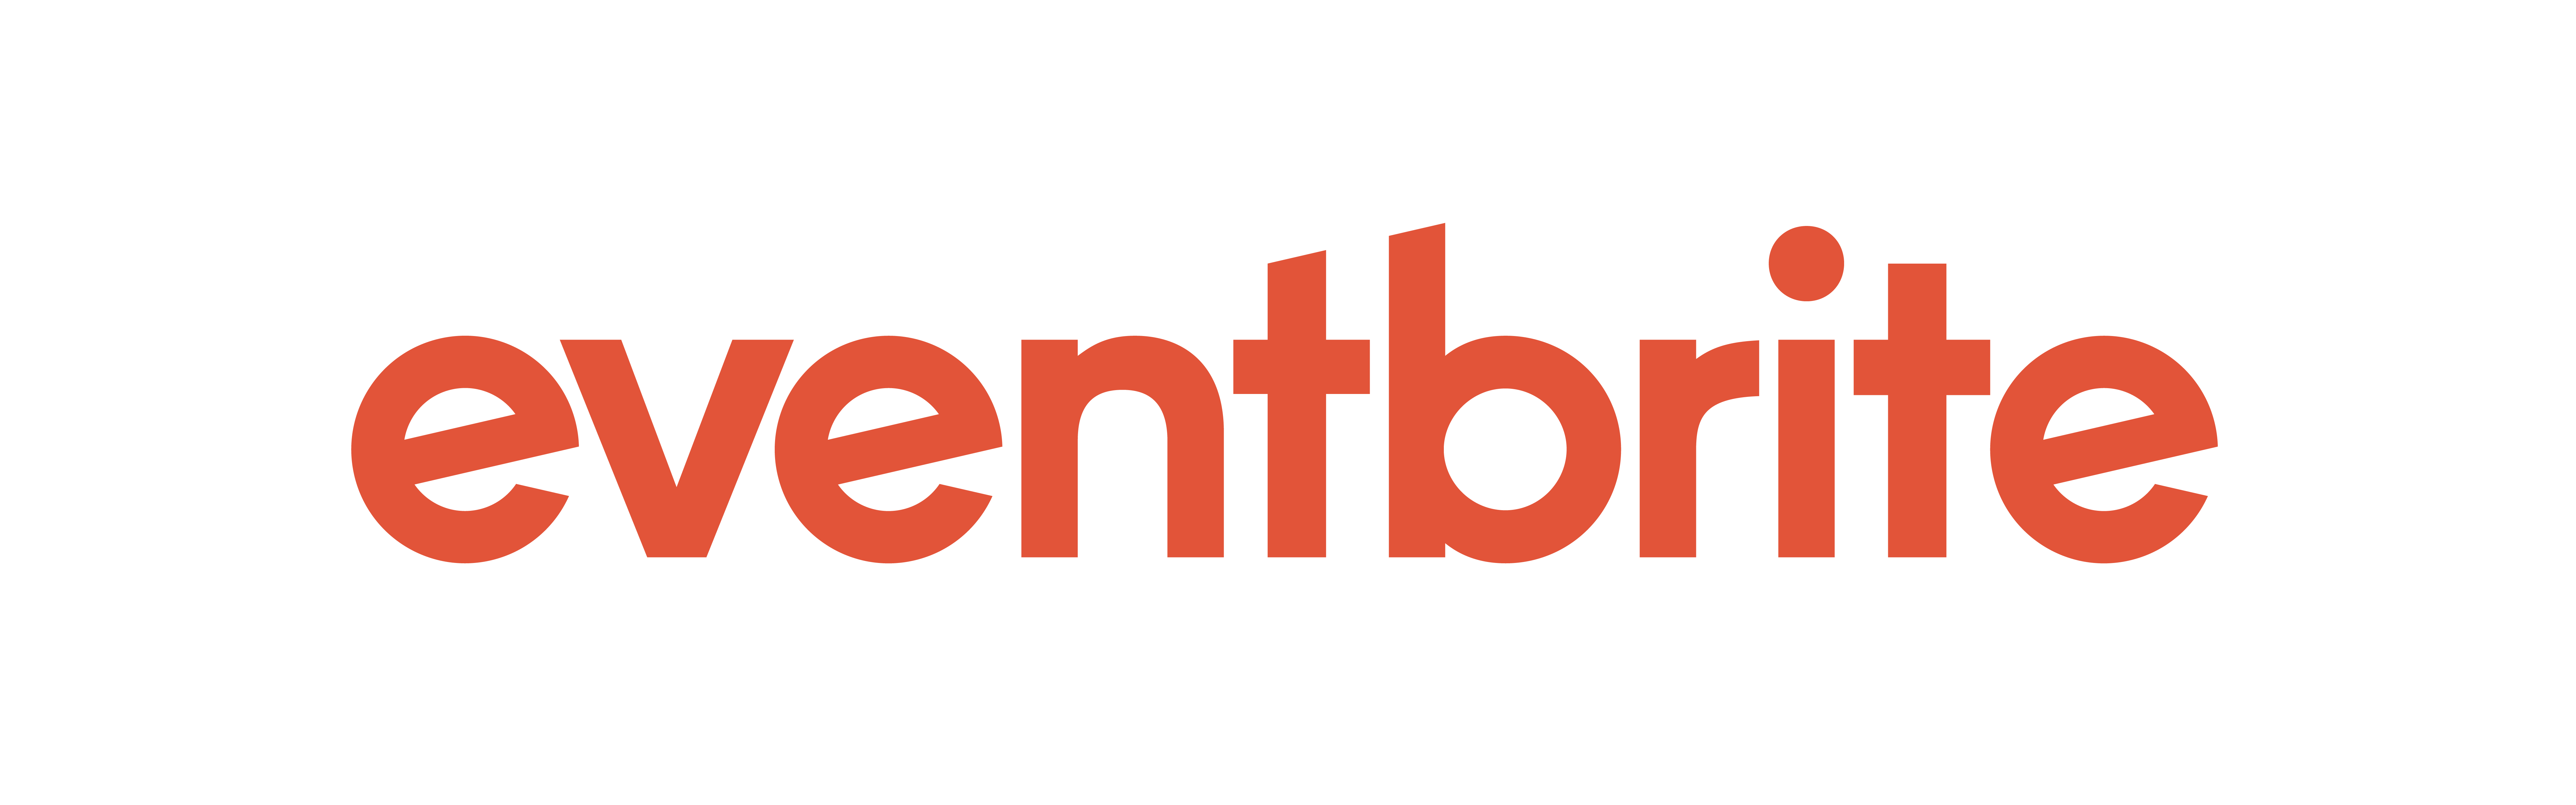 eventbrite cost for free events